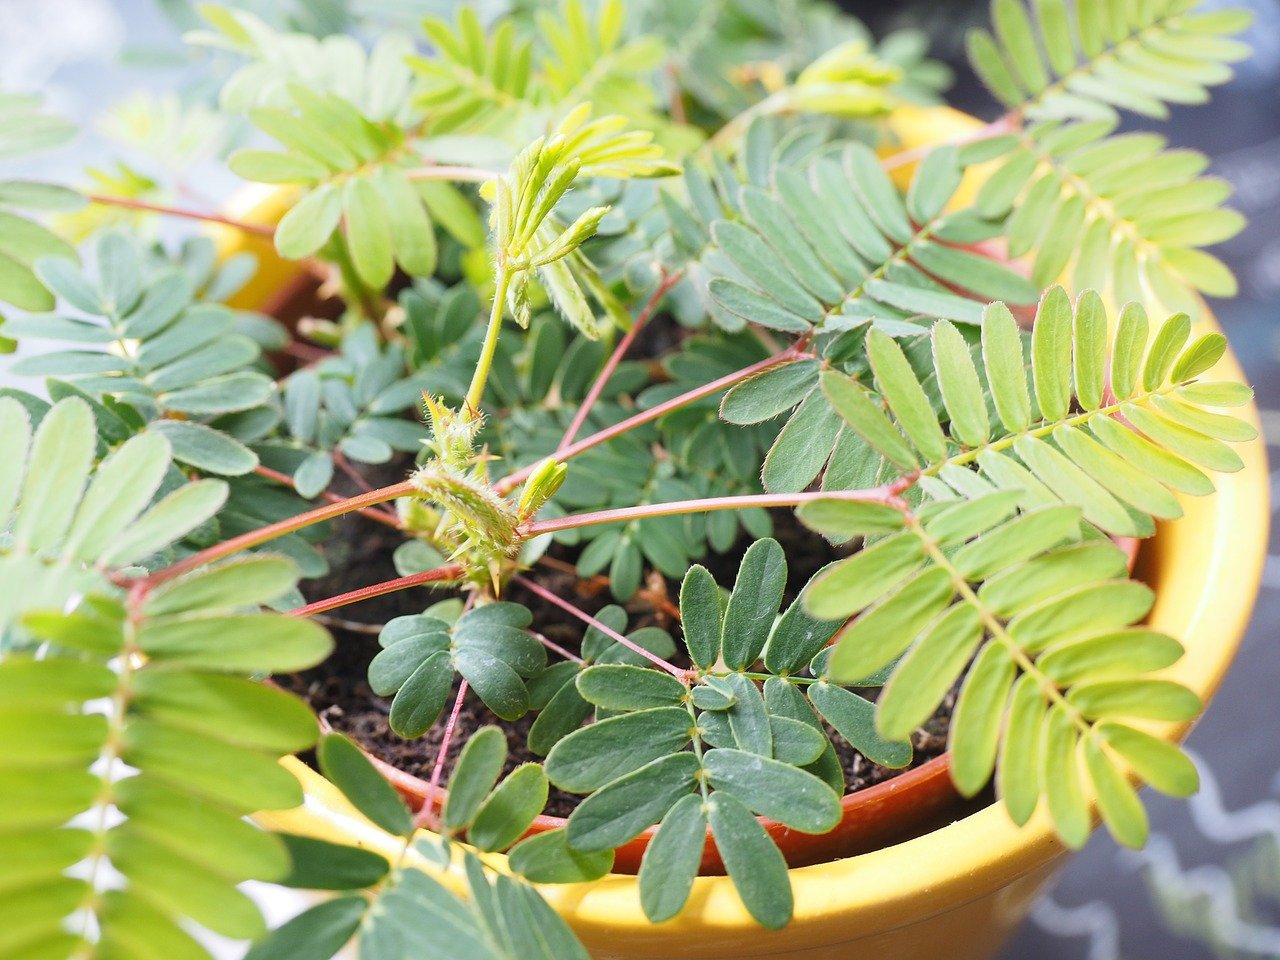 A Mimosa plant in a pot